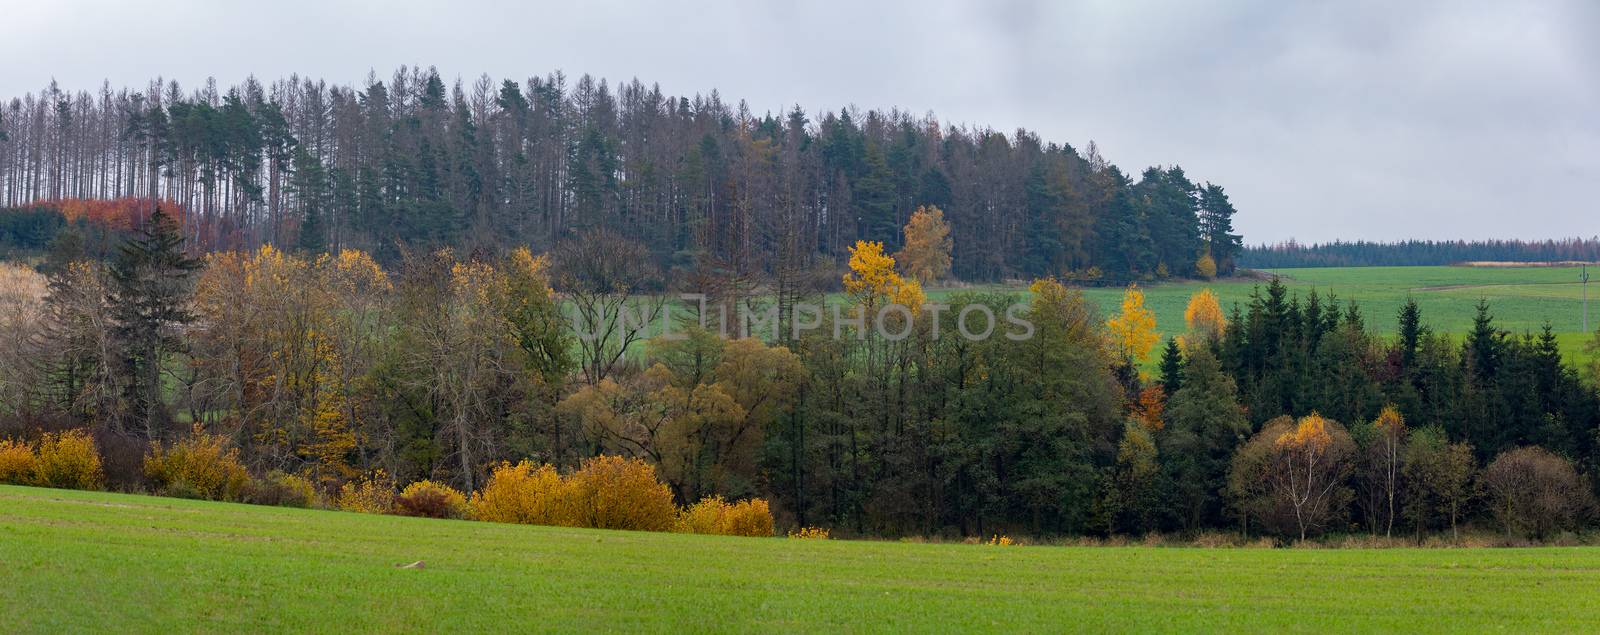 Autumn landscape coloured trees and meadow, Highland Vysocina, Czech Republic, Mined woodland attacked by beetle.